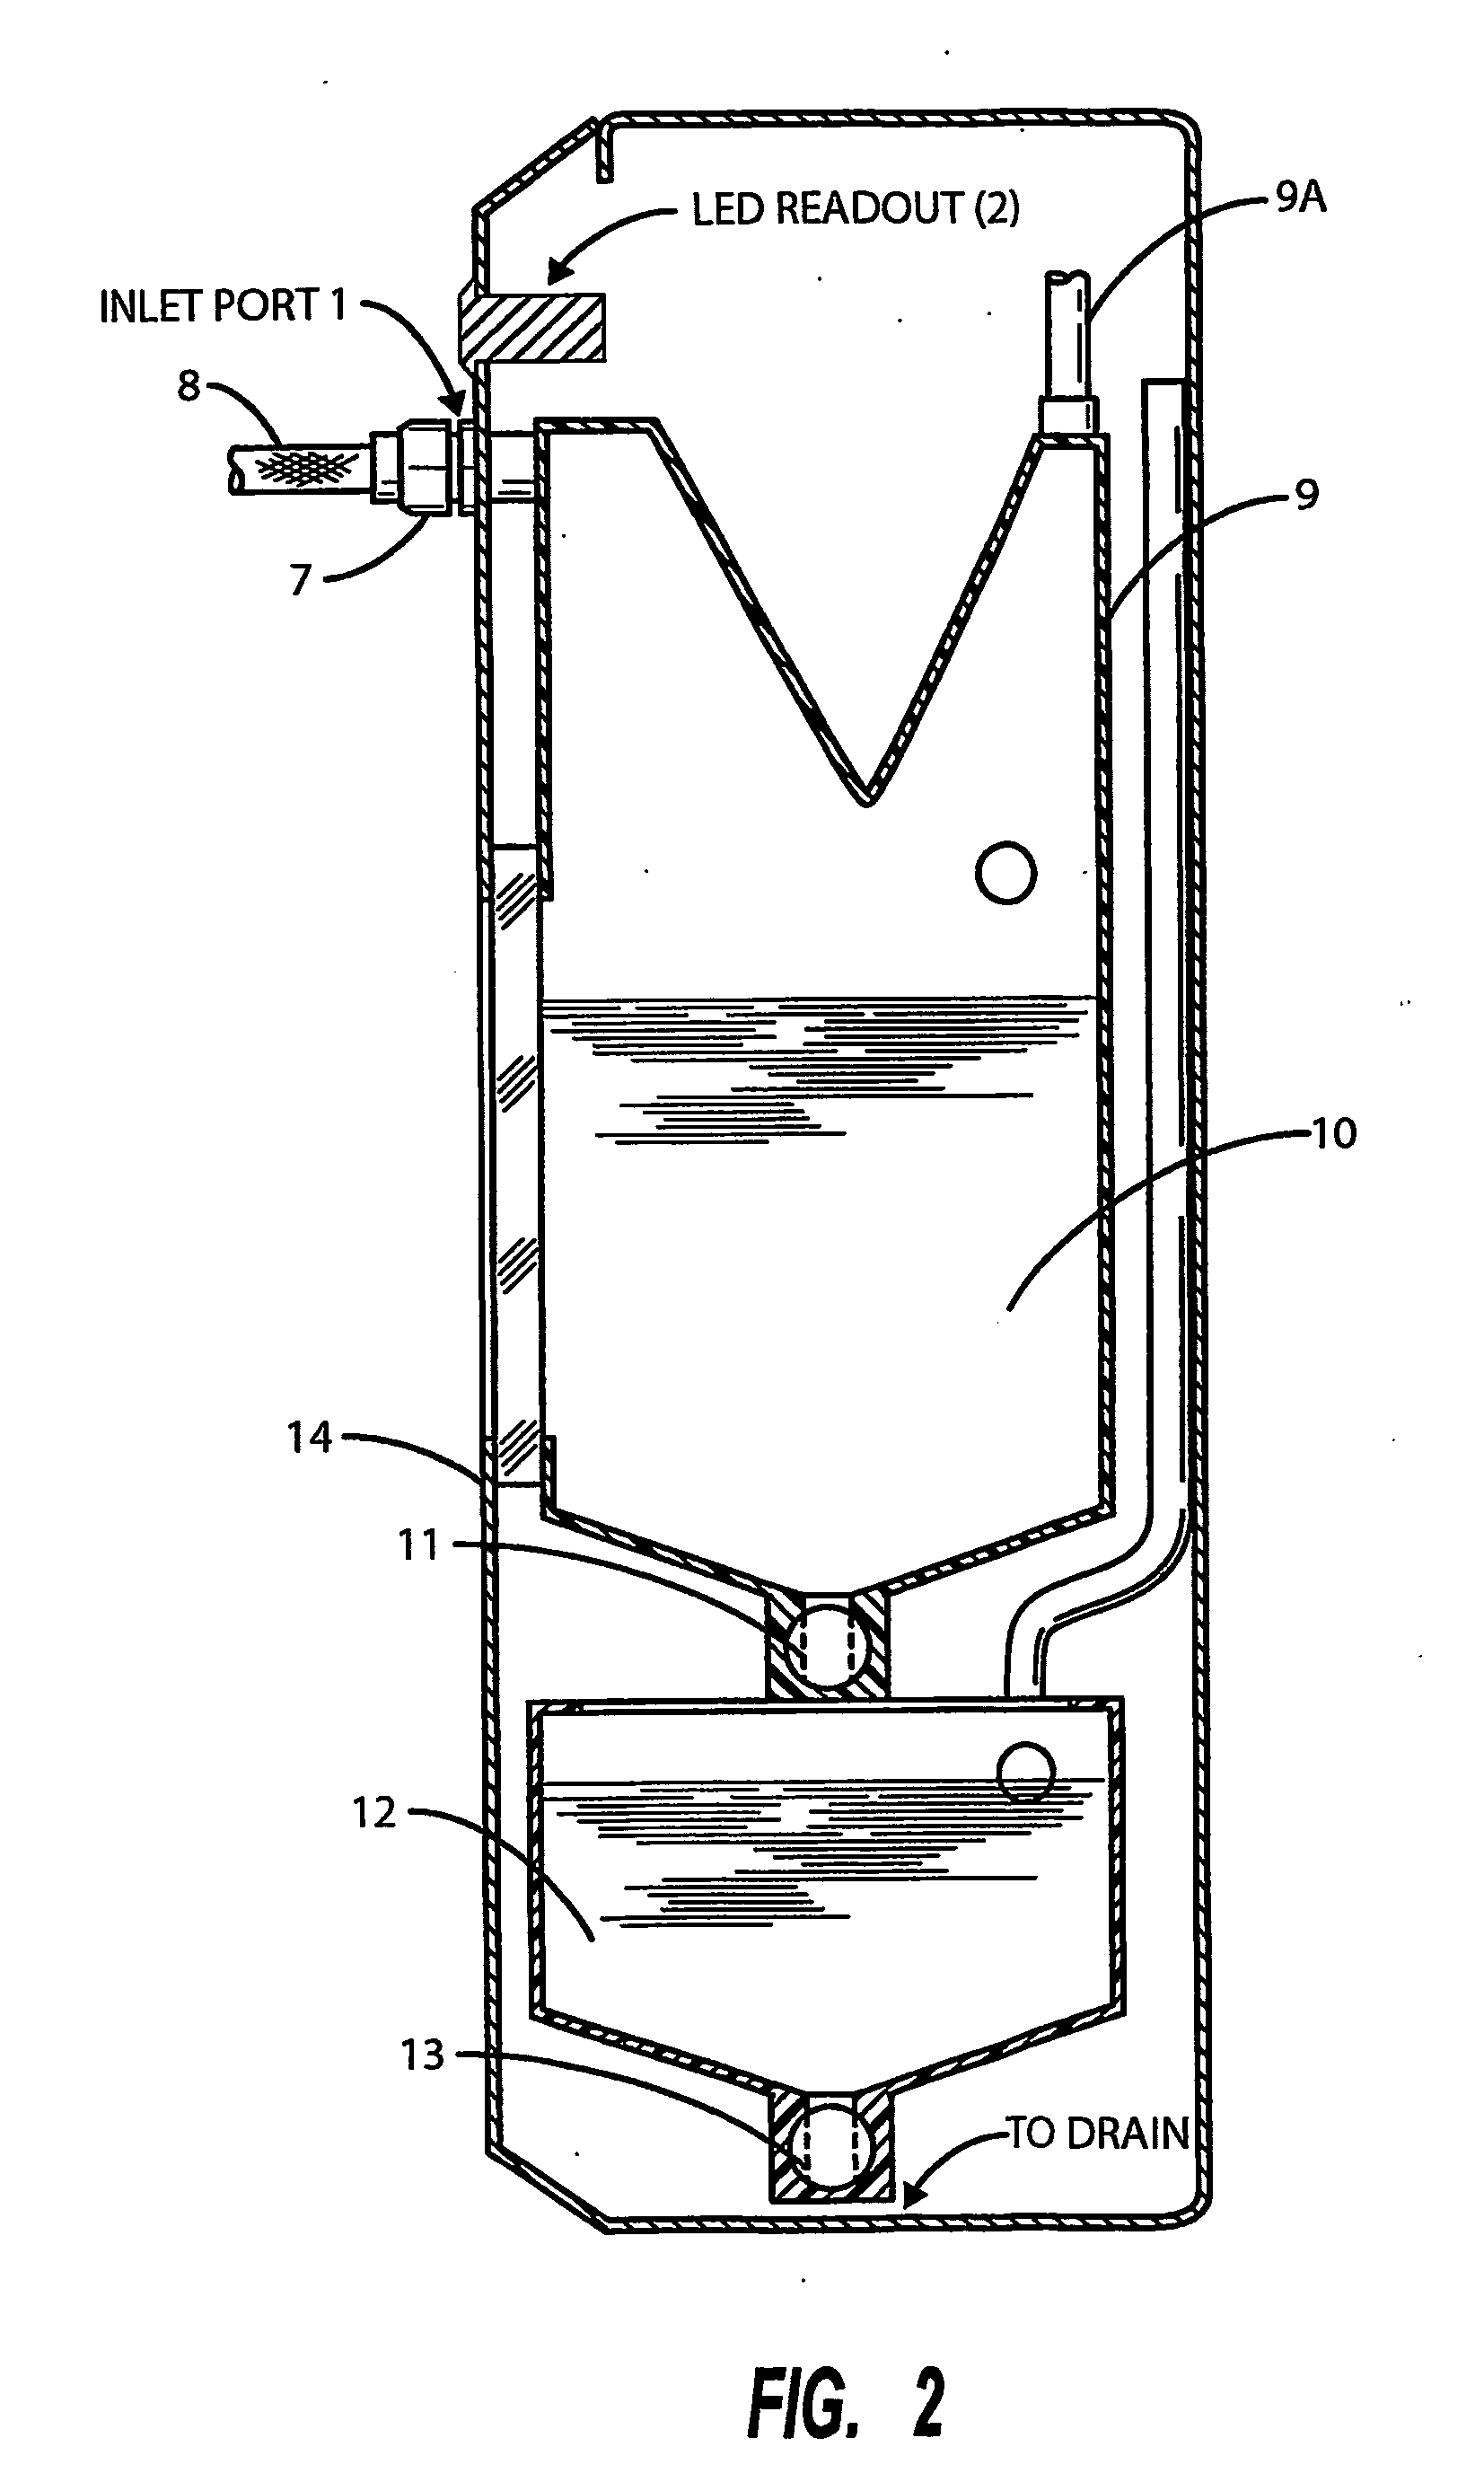 Method and apparatus for disposing of liquid surgical waste for protection of healthcare workers